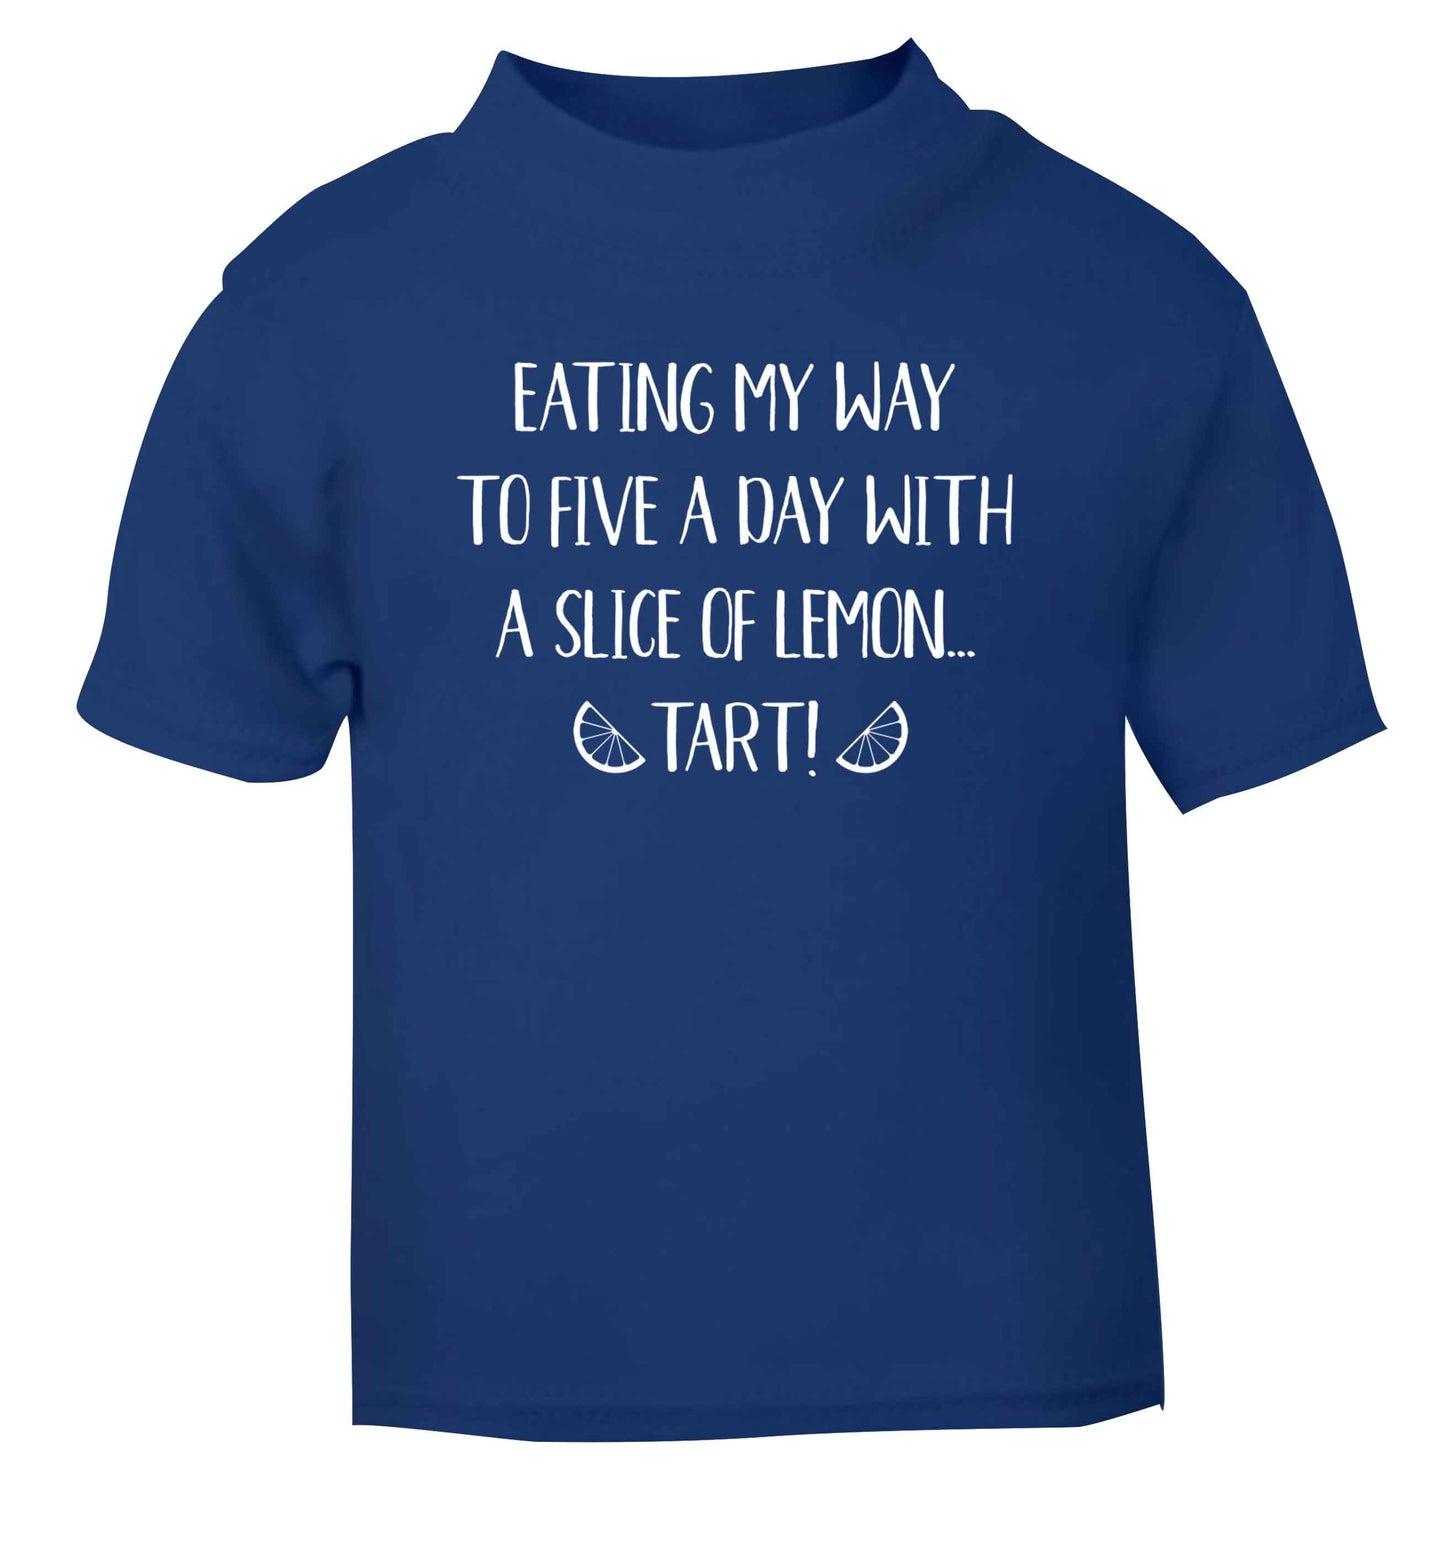 Eating my way to five a day with a slice of lemon tart blue Baby Toddler Tshirt 2 Years